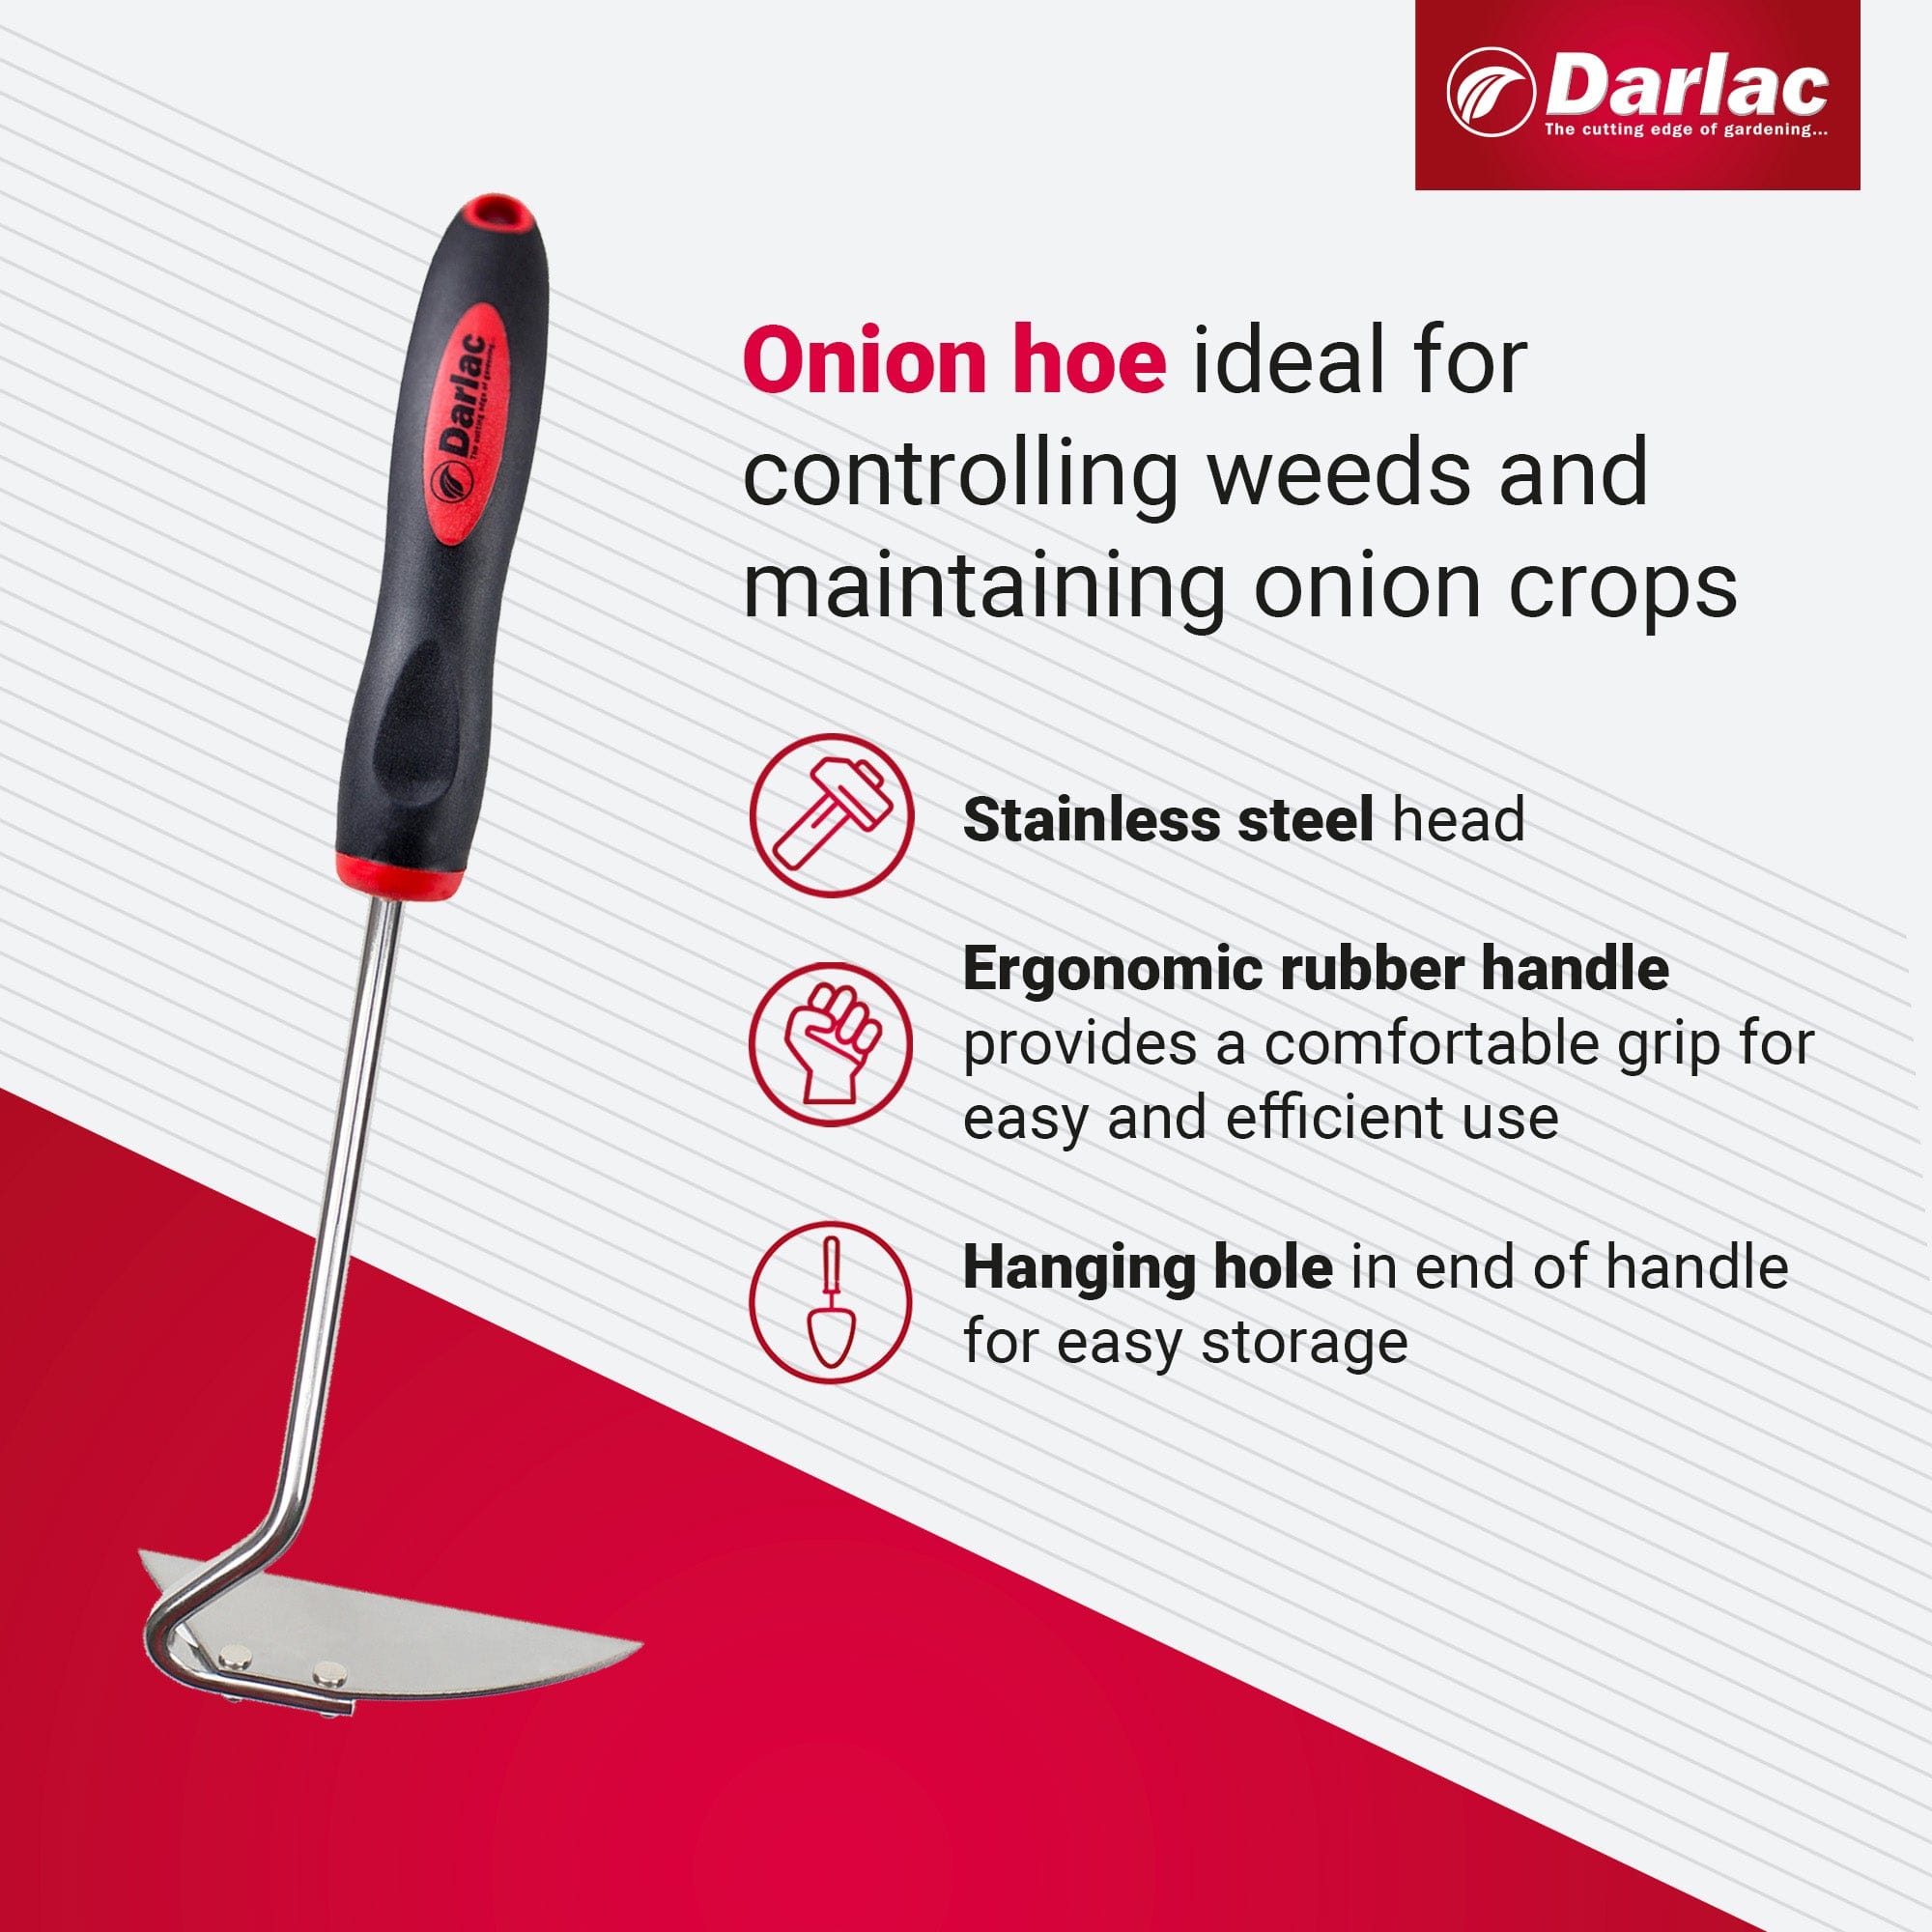 dt-brown HARDWARE Darlac Stainless Steel Onion Hoe